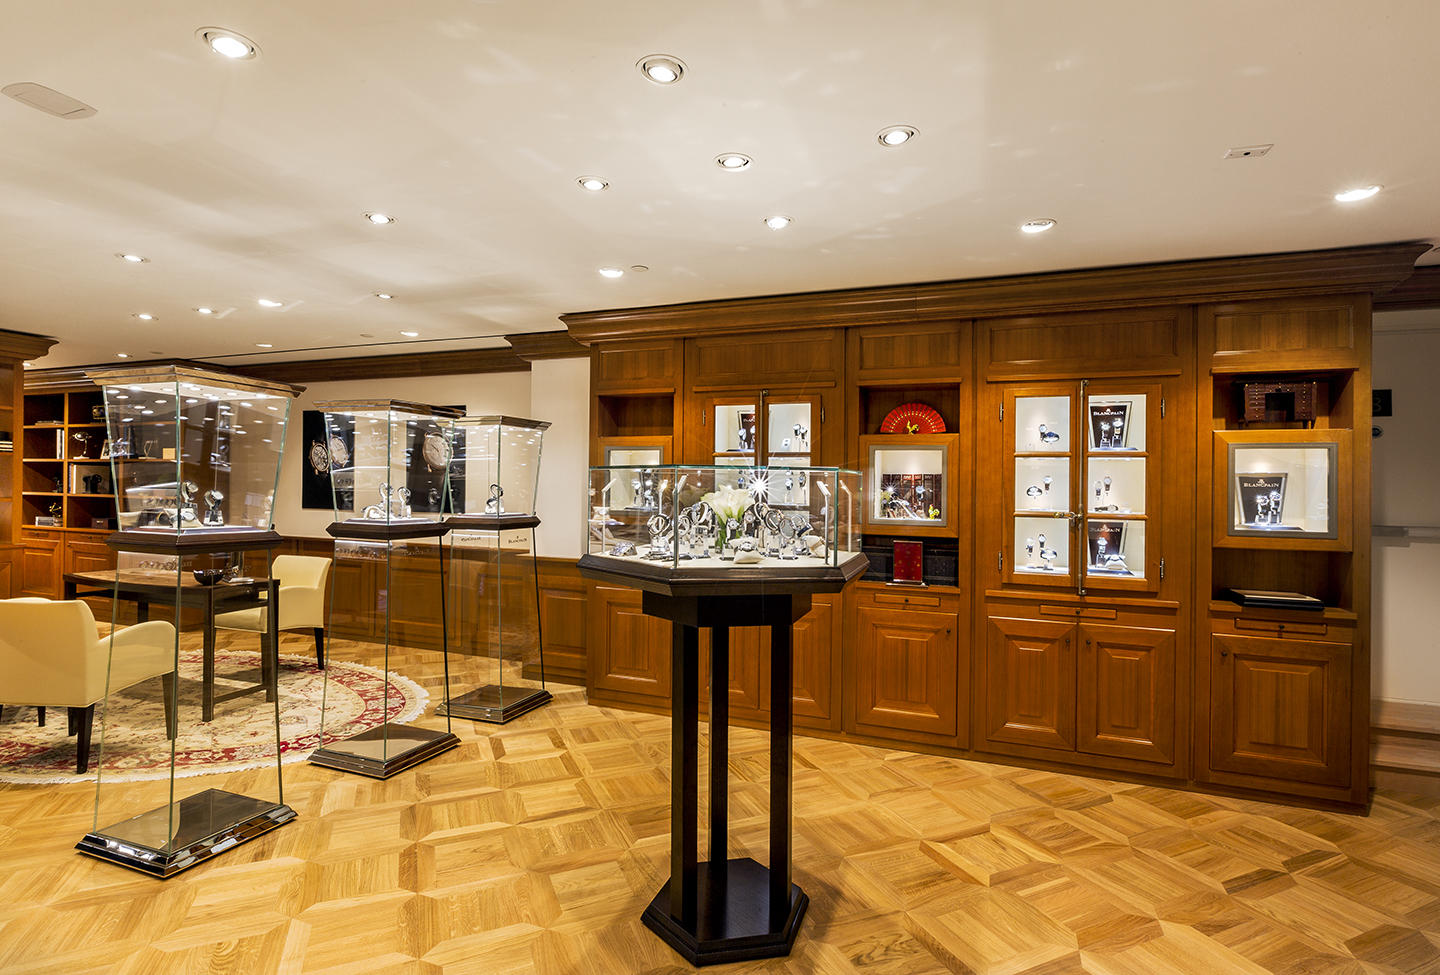 Blancpain Watches retail store on 5th Avenue NYC for the Swatchgroup, Inc. : Blancpain Watches NYC : New York NY Architectural Photographer | Interior and Exterior